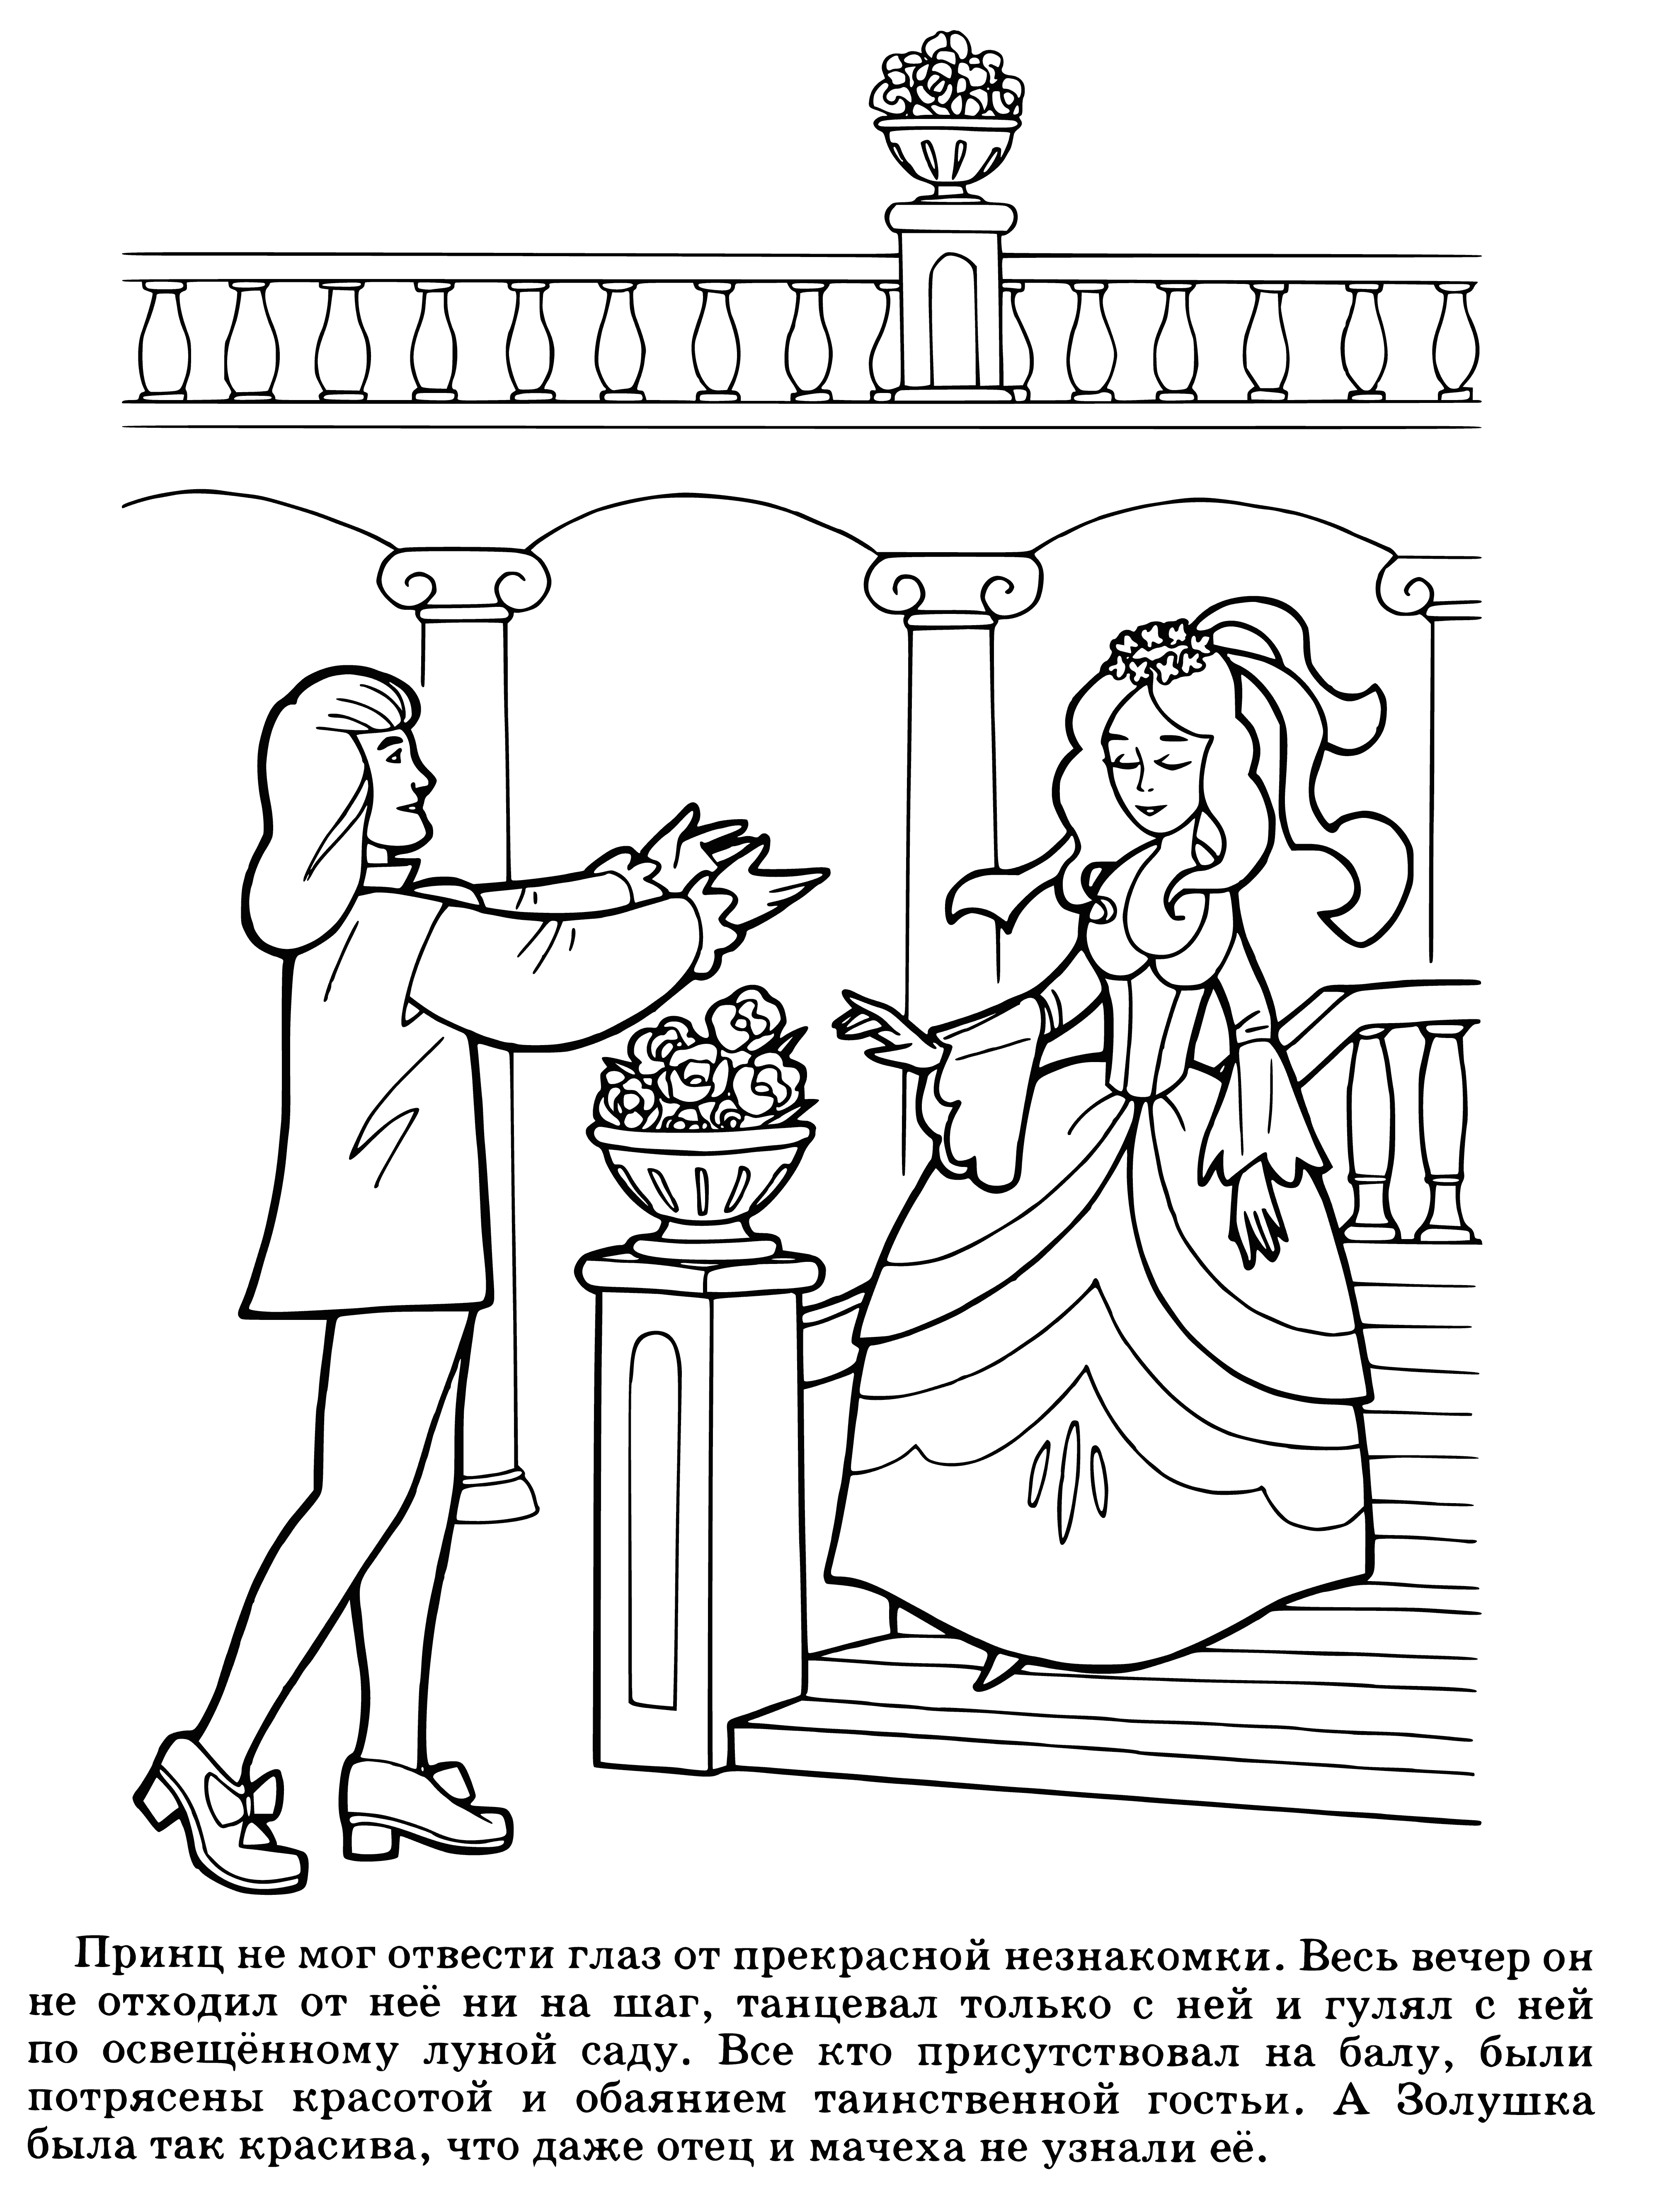 coloring page: Boy, 8yo, dressed in blue coat w/ gold buttons & red cape, white shirt w/ ruff collar, black belt, standing in front of large door w/ gold knocker, delighted expression.